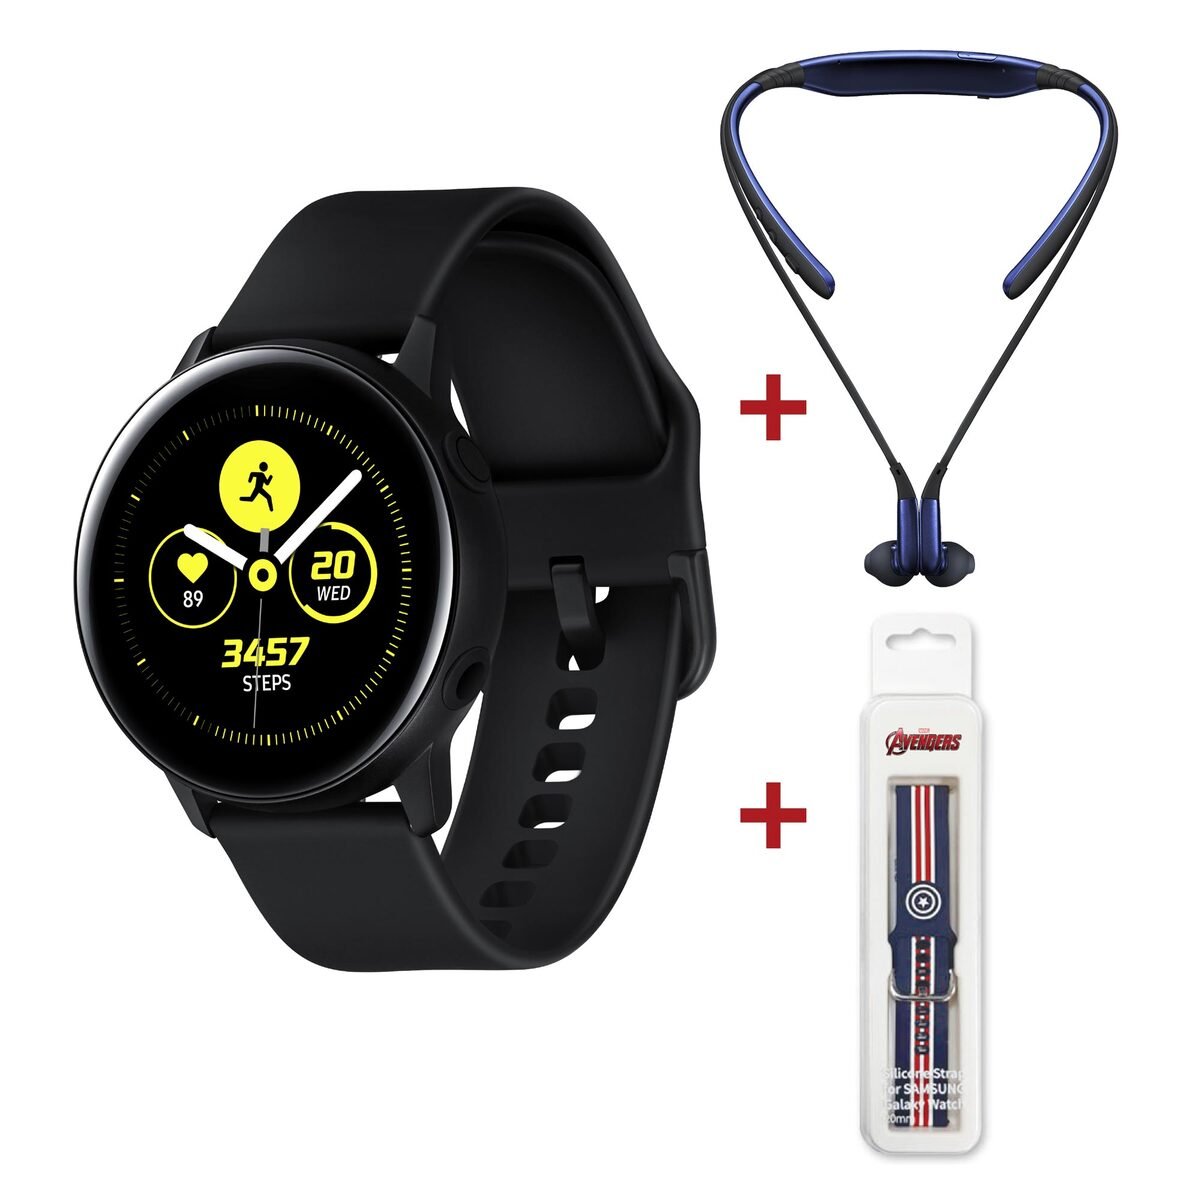 Samsung Galaxy Watch Active SM-R500 Black + Samsung Level U Headset Assorted Color + Silicon Watch Strap Assorted Color